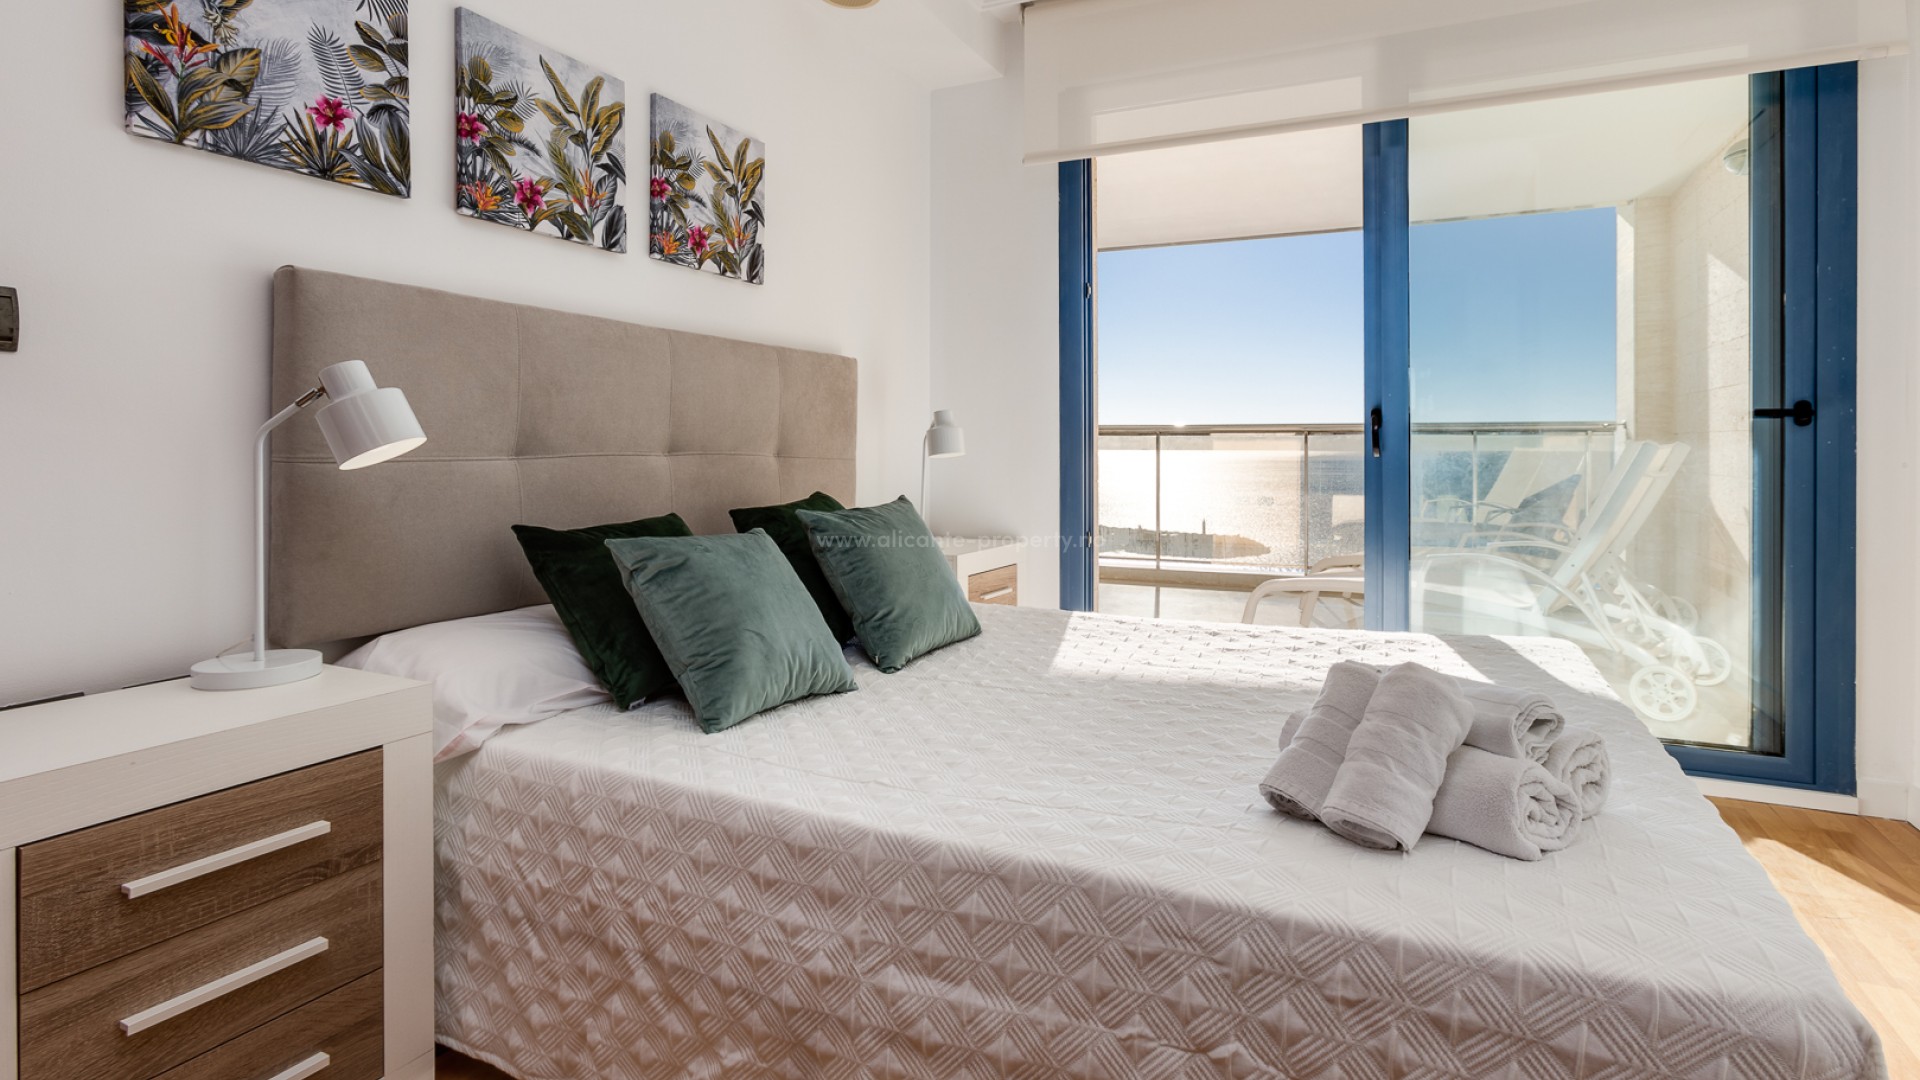 Apartments/flats by the beach in Altea, with fantastic views over the Mediterranean, first line apartments w/view, 82 m2, 2 bedrooms, 2 bathrooms